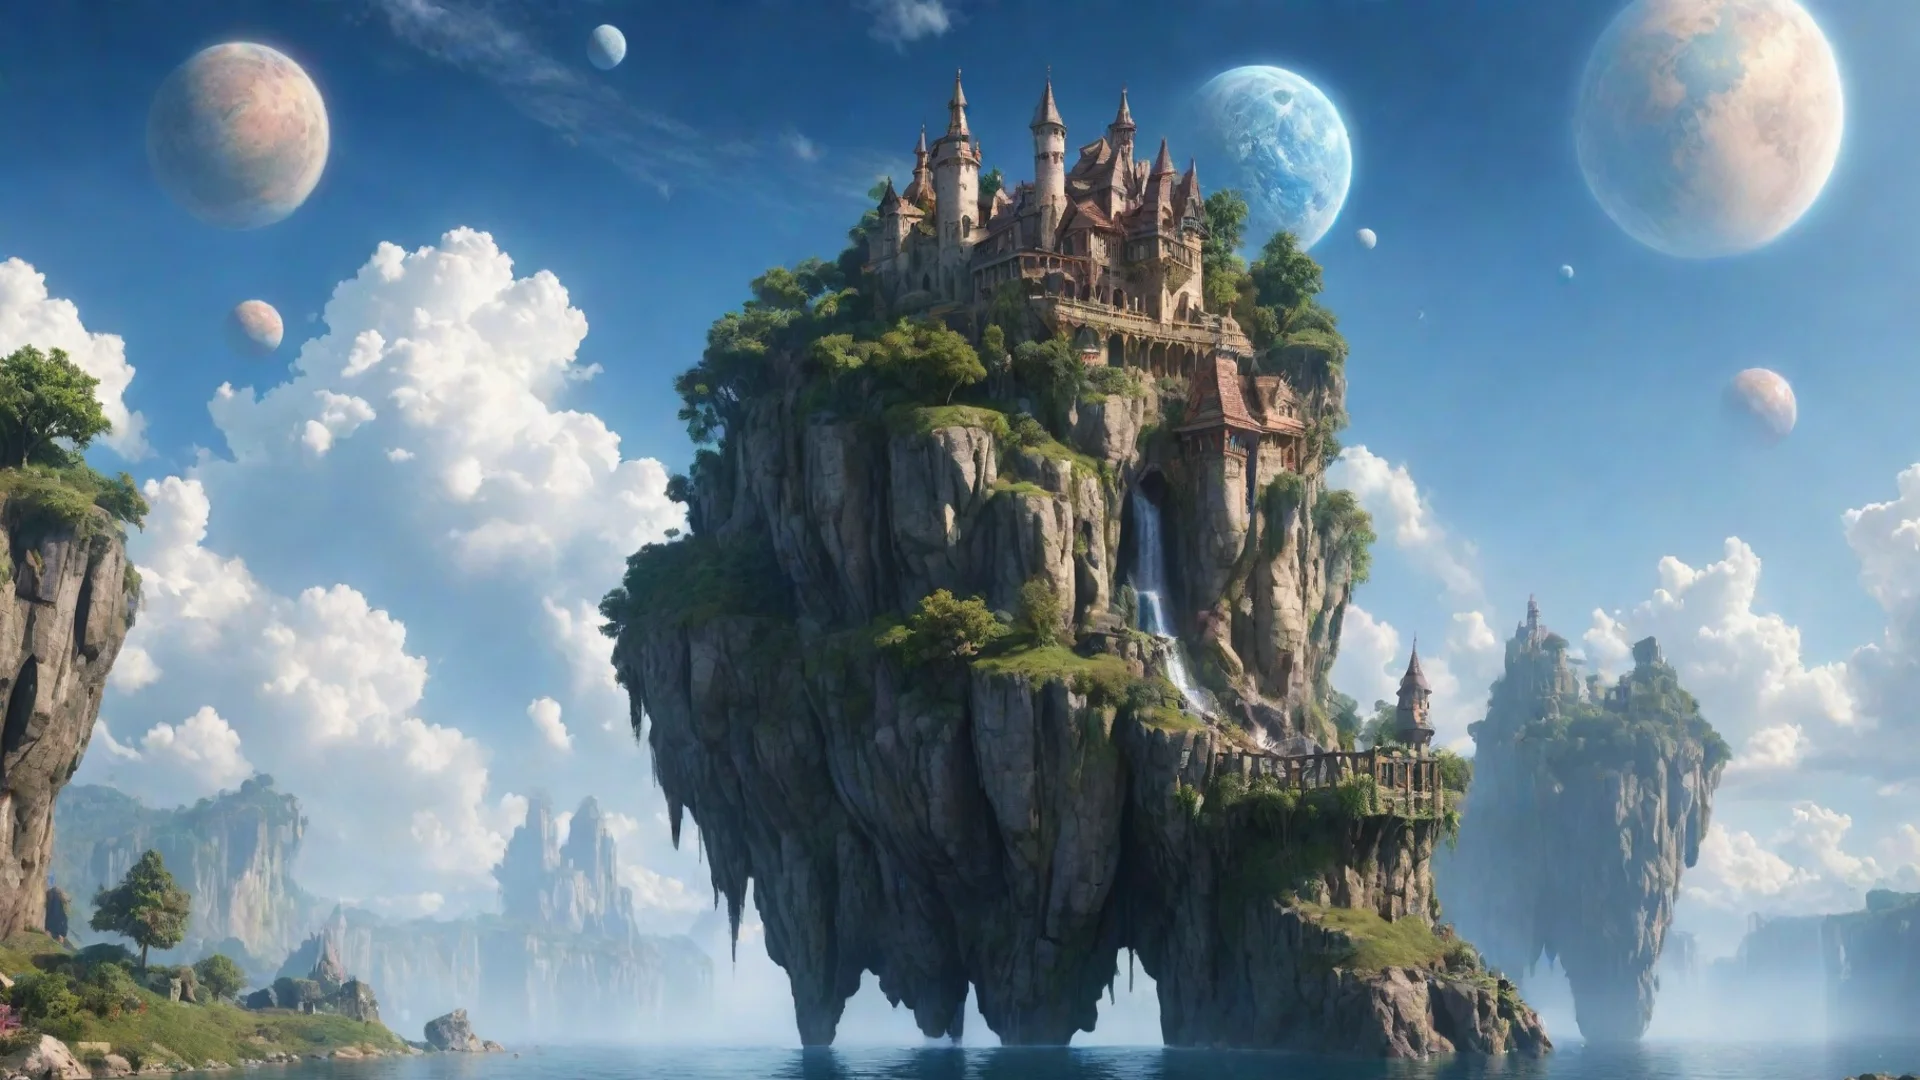 amazing peaceful cottage in sky epic floating castle on floating cliffs with waterfalls down beautiful sky with planets awesome portrait 2 wide